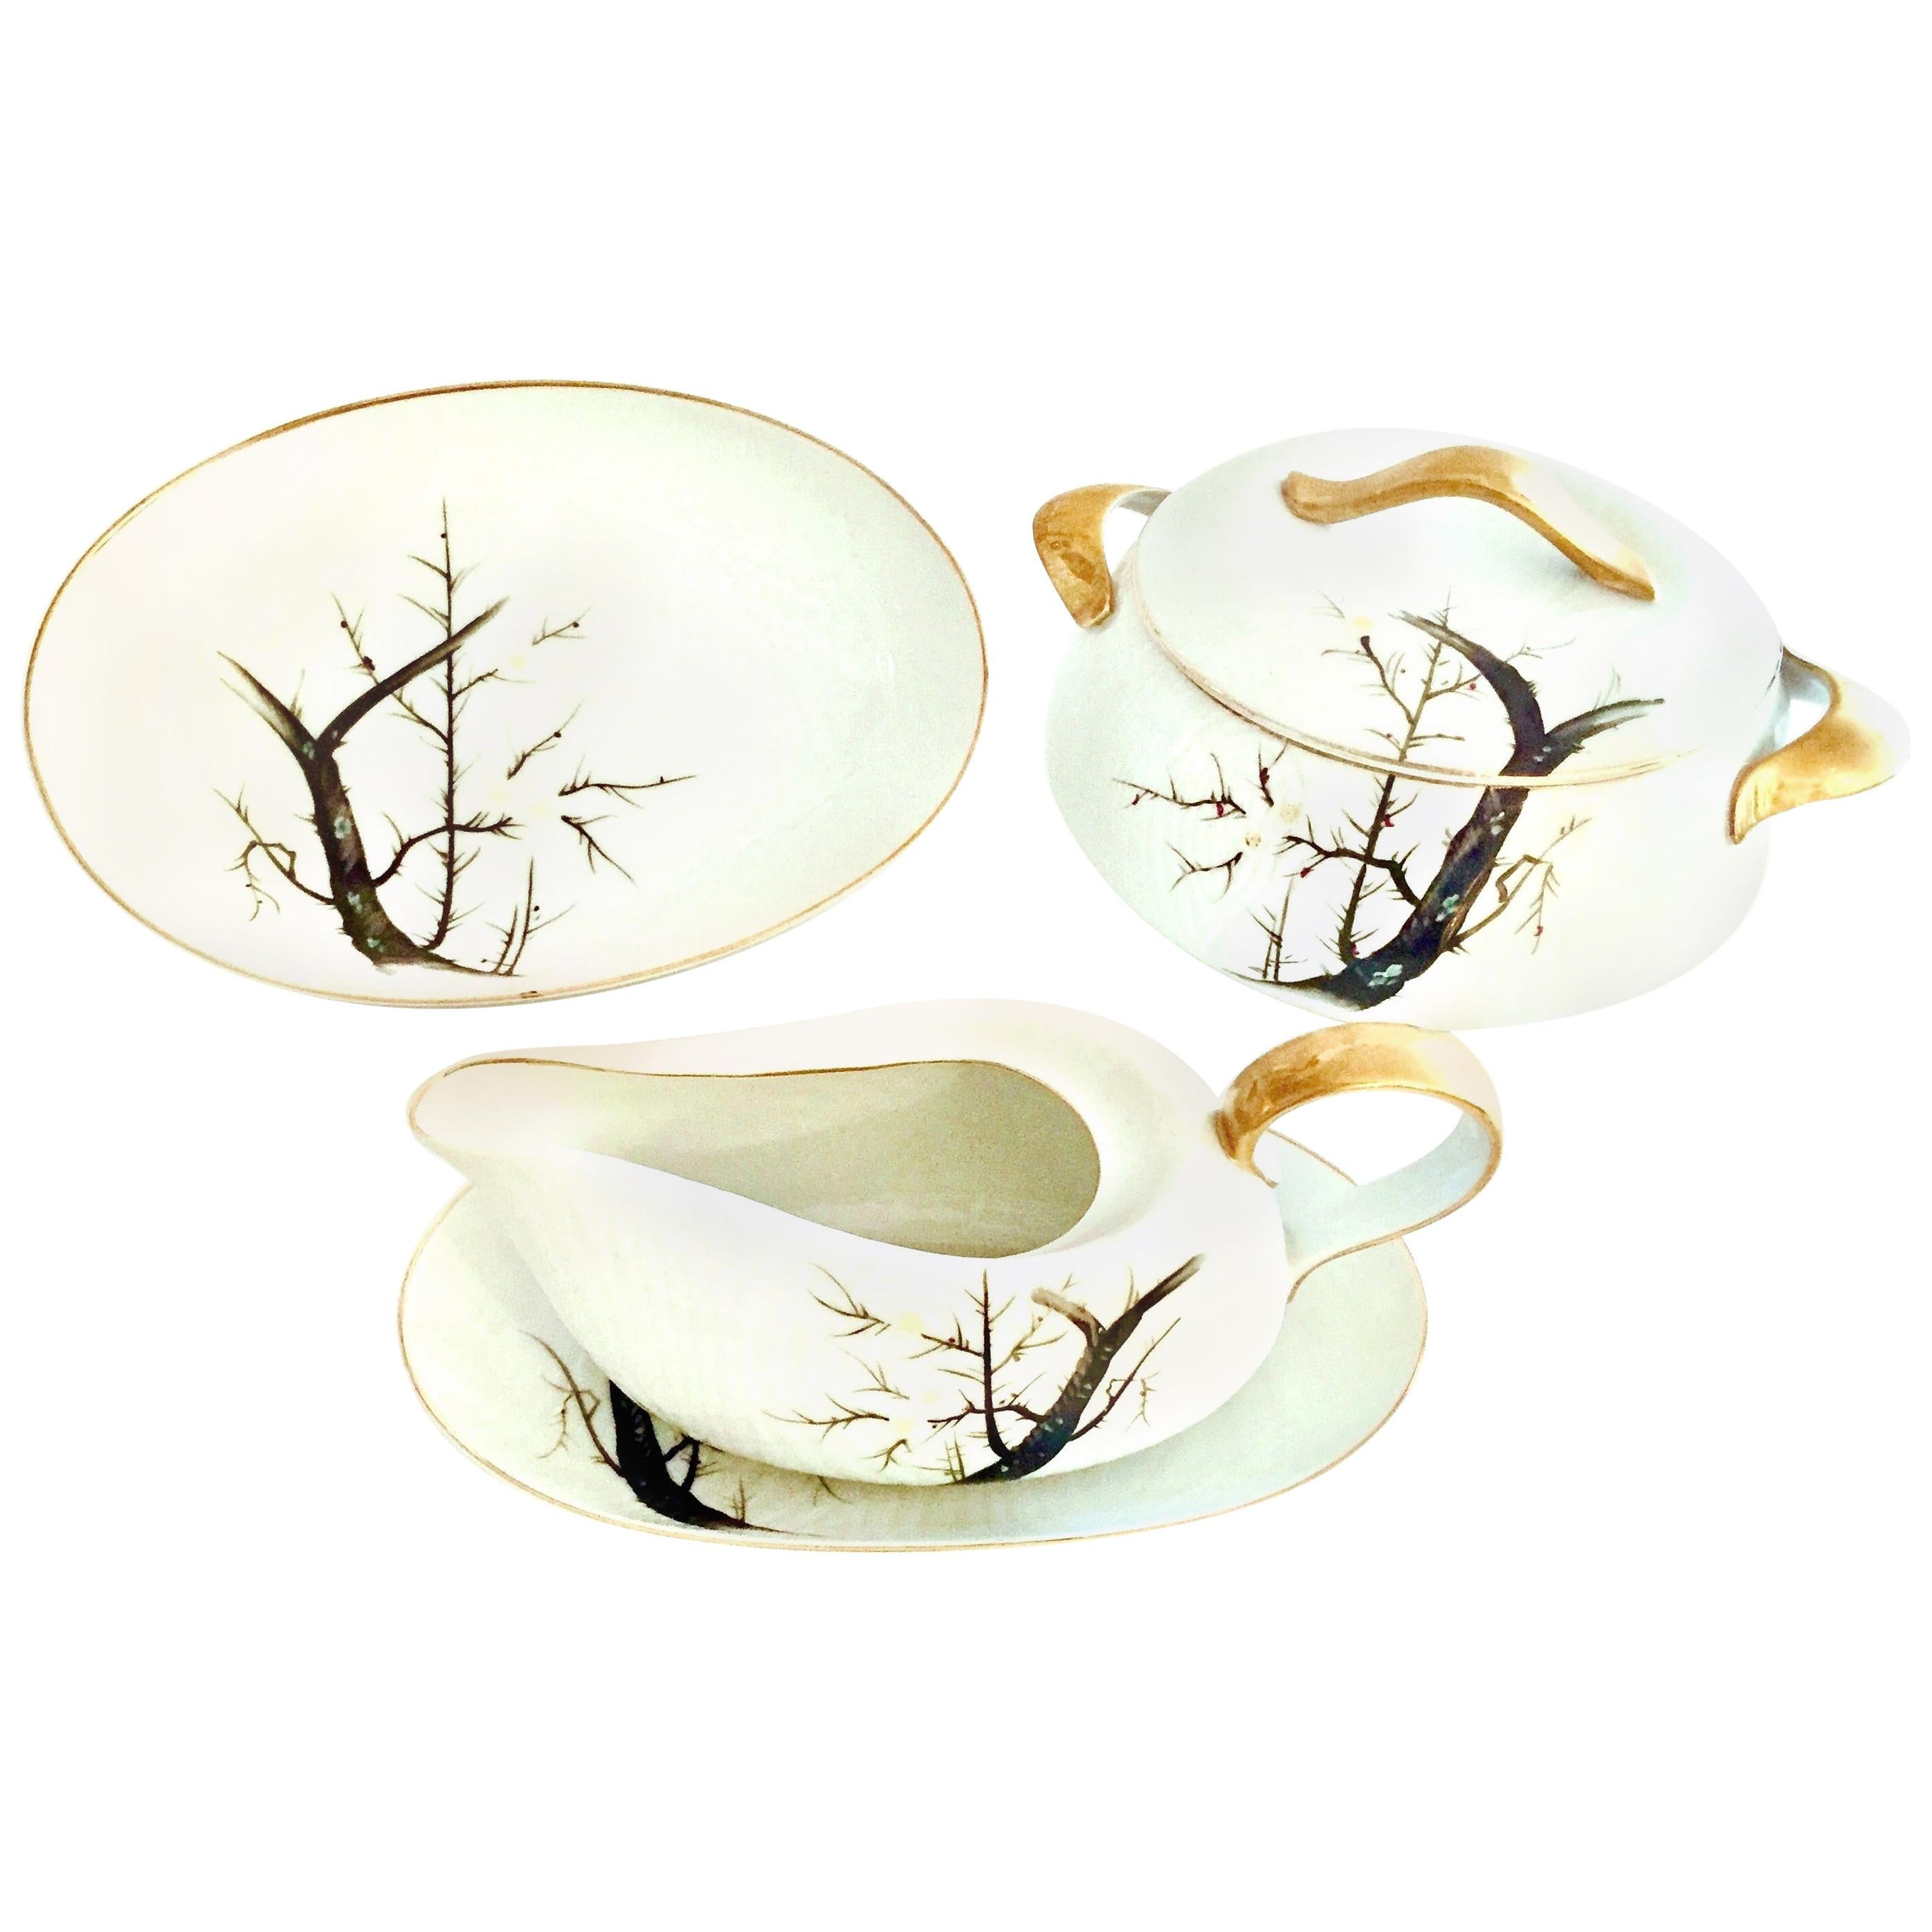 1950s Japanese Porcelain Serving Piece "White Plum" Set of 5 by, Gold China For Sale